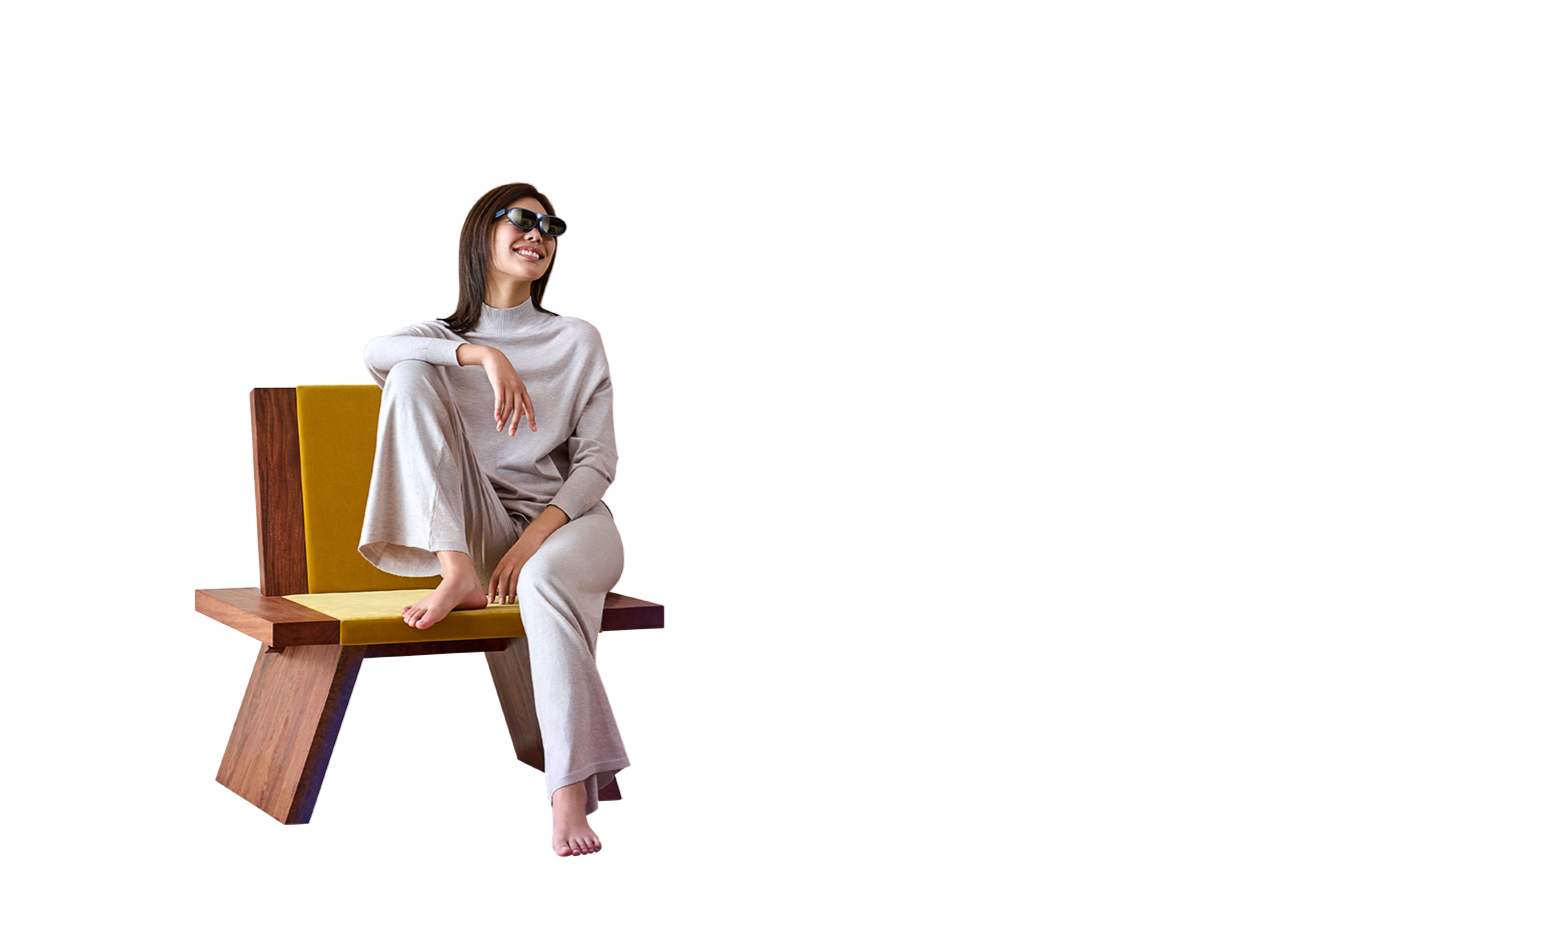 A woman wearing Rokid Max AR glasses sitting on a chair